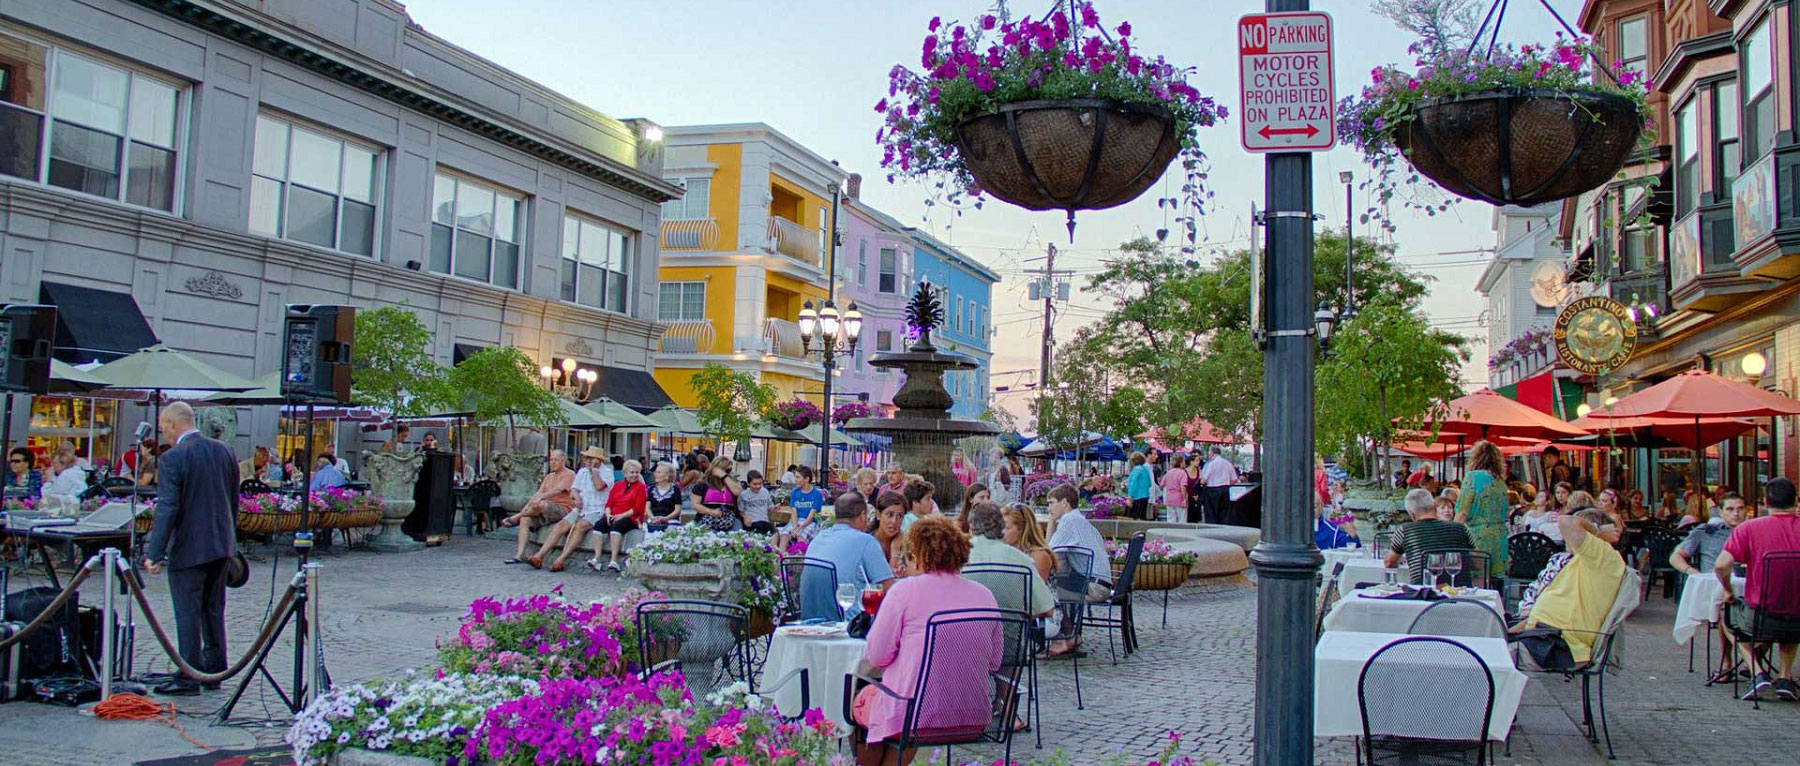 Summer at DePasquale Square in Providence, RI